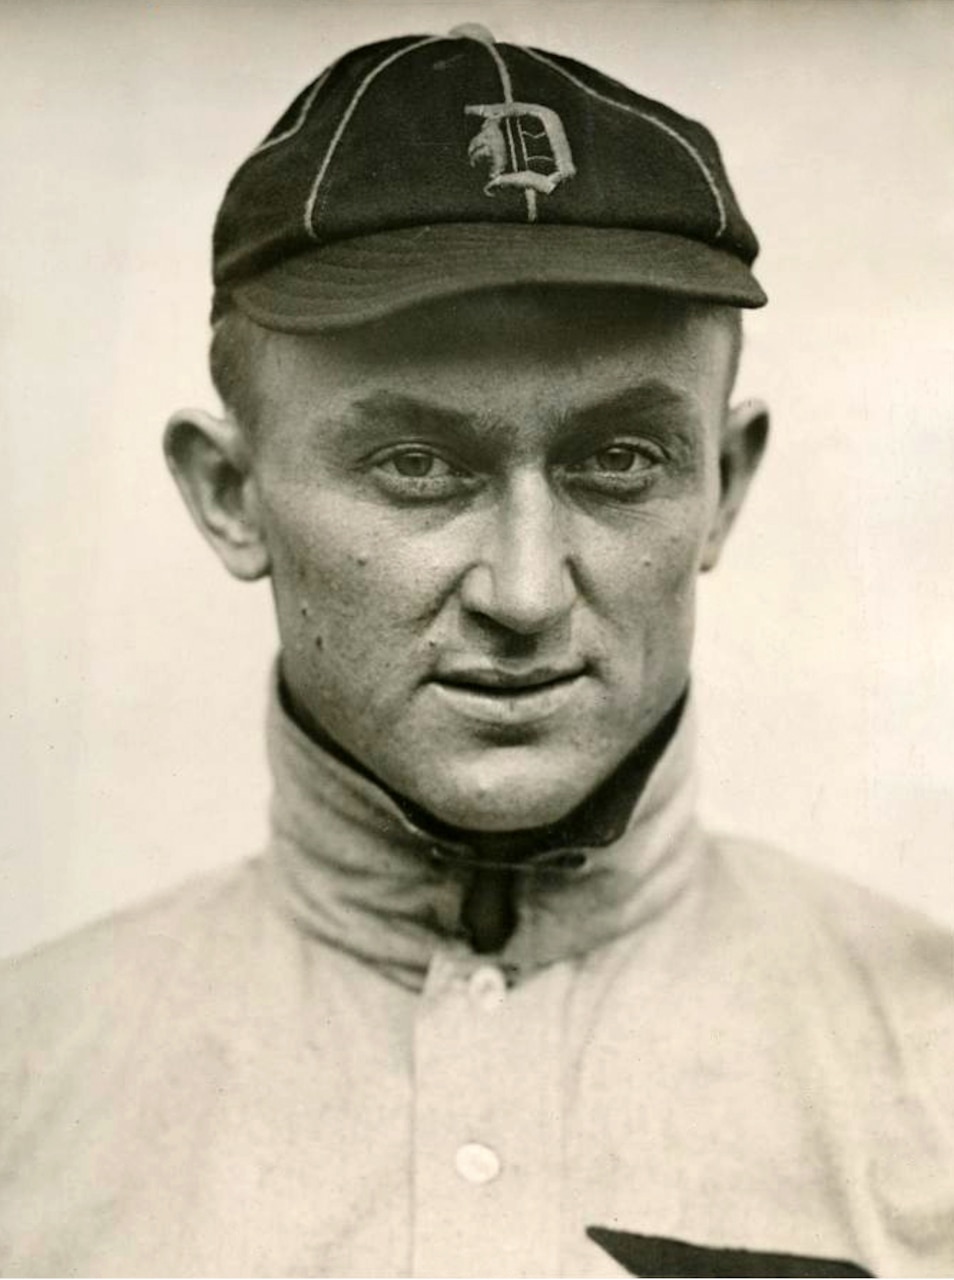 A man in a baseball uniform poses for a photo.